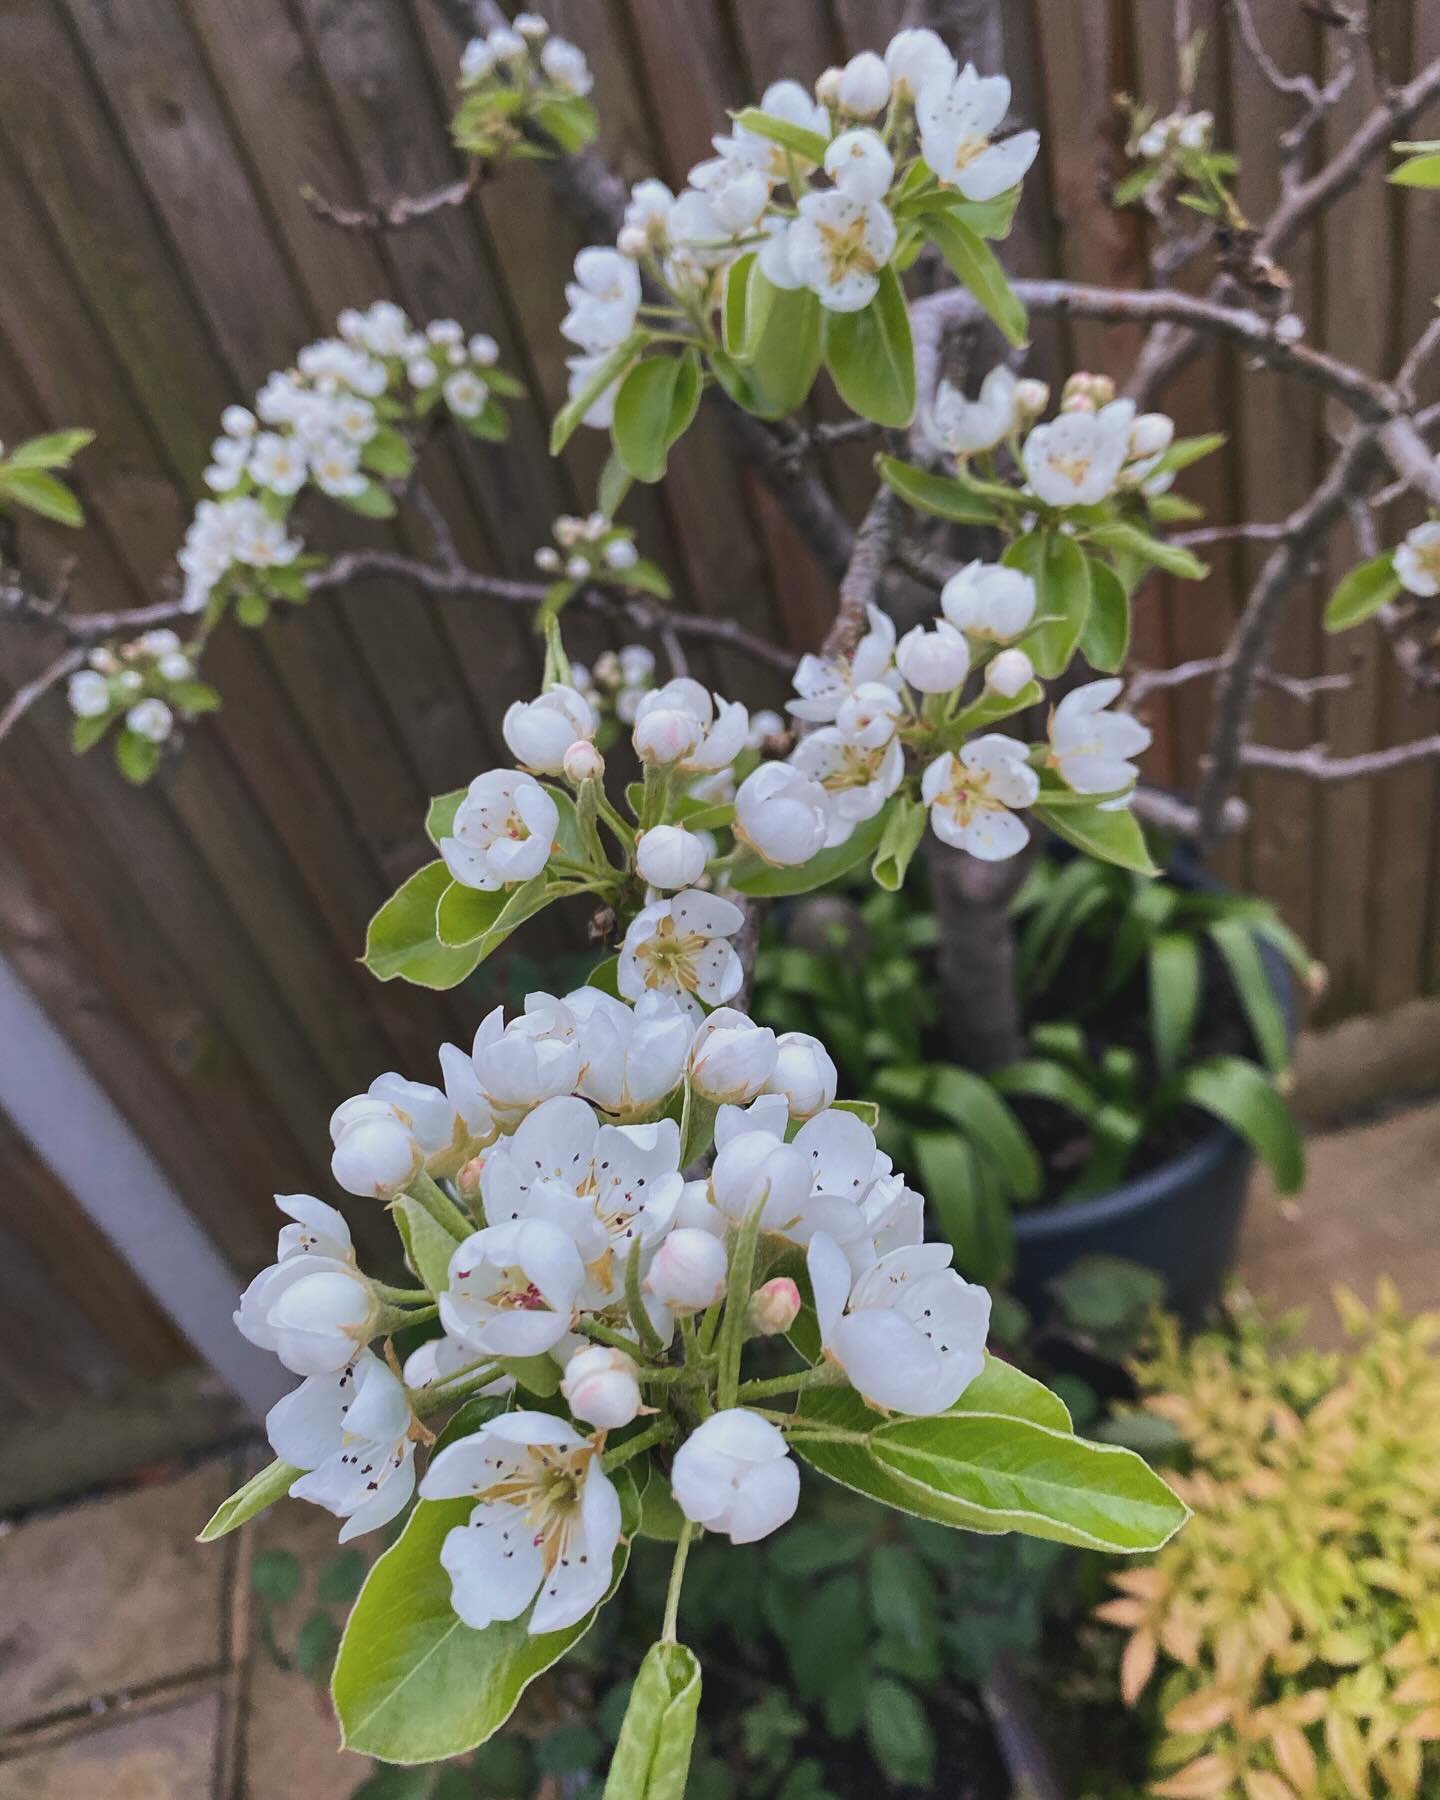 Pear tree blossom 🍐🌿✨

All the magic of the garden coming awake!! Everything is bursting forth!! I love it 🥰